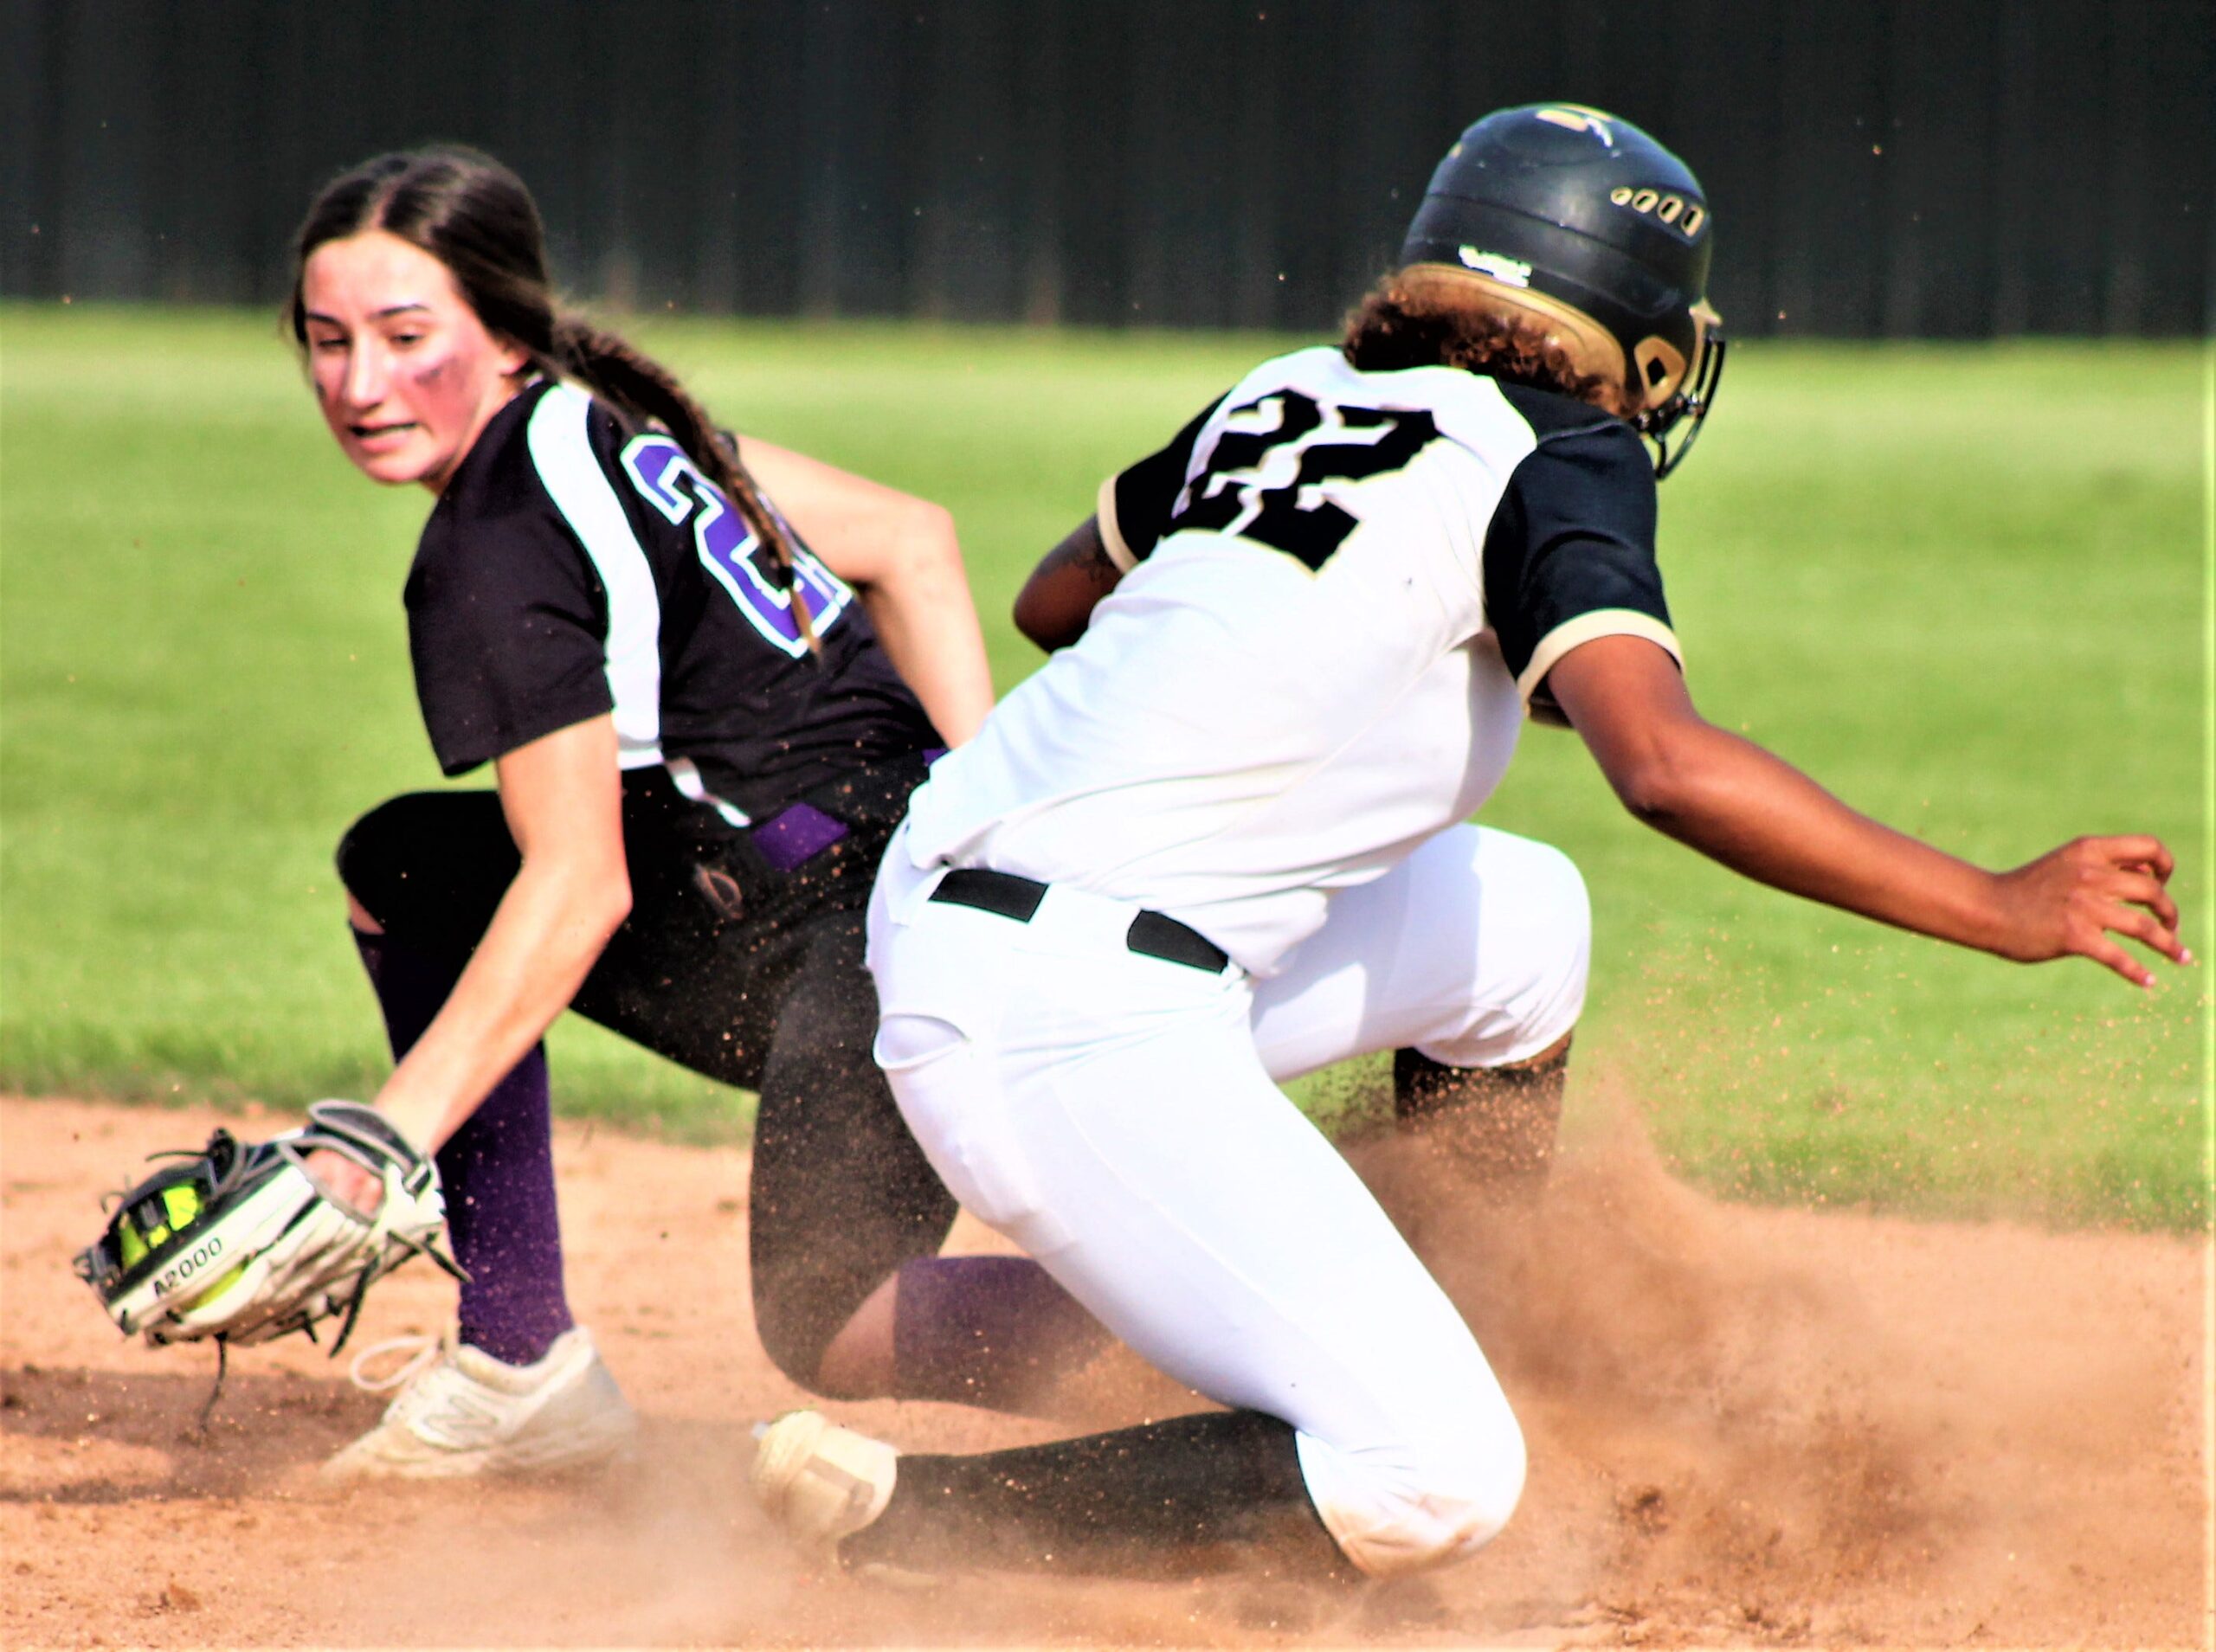 Leesville junior Amaya Thomas (22) slides safely into second base during the Lady Cats' first-round playoff win a few weeks ago. Thomas was one of three Lady Cats named first-team all-district in 3-4A.